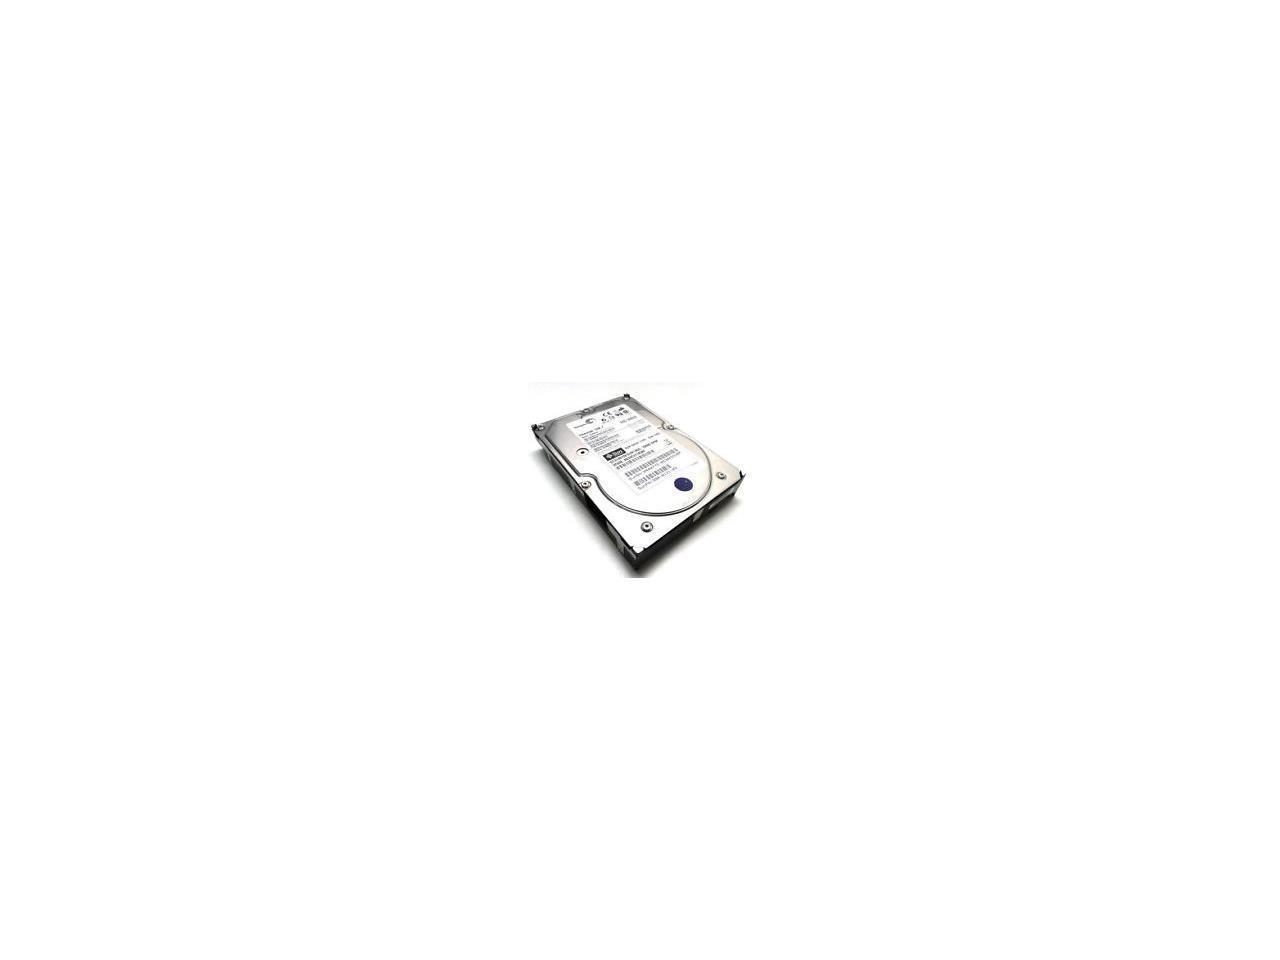 SEAGATE St3600002Fc Cheetah Ns.2 600Gb 10000Rpm 4Gbps 3.5Inch Form Factor 16Mb Buffer Fibre Channel Hard Disk Drive